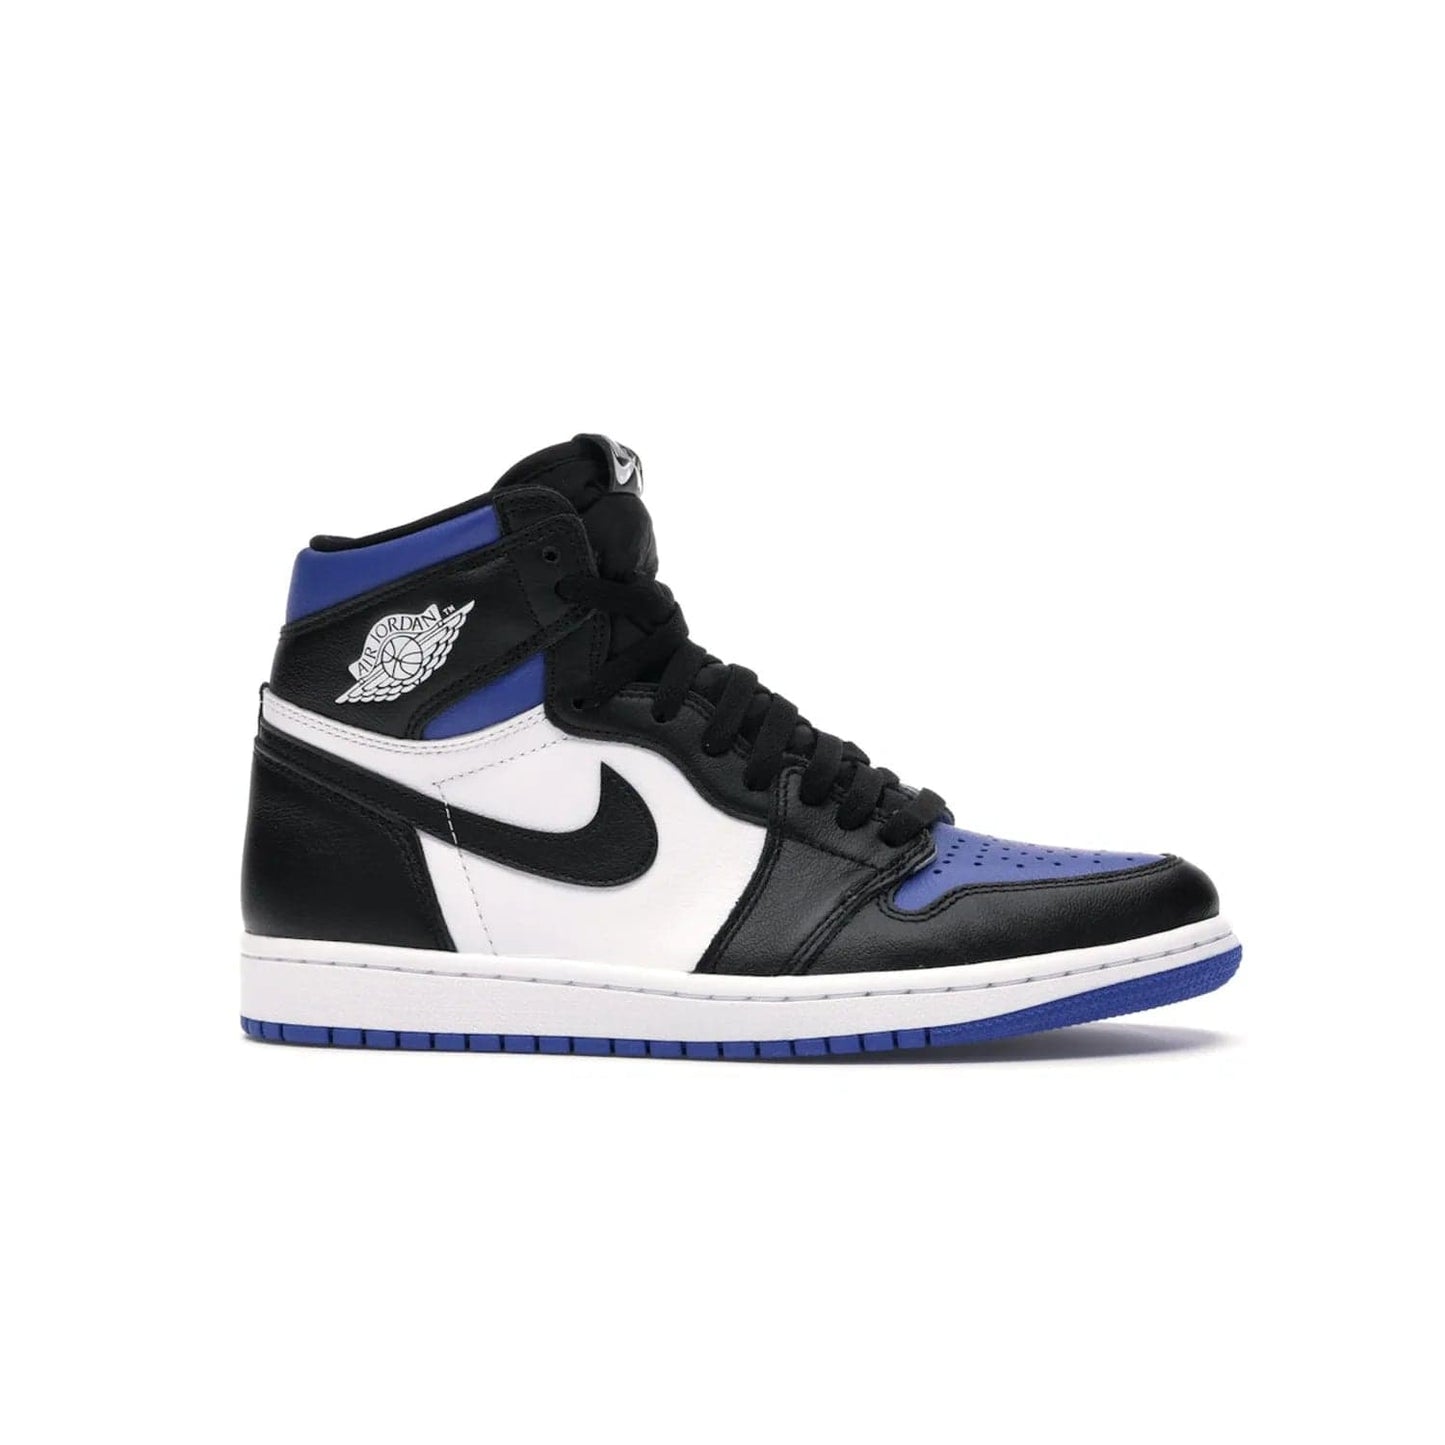 Jordan 1 Retro High Royal Toe - Image 2 - Only at www.BallersClubKickz.com - Refresh your look with the Jordan 1 Retro High Royal Toe. This classic AJ 1 sports a white and royal leather upper, black leather overlays, and branded leather tongue tag. Pick up today and set the streets ablaze.